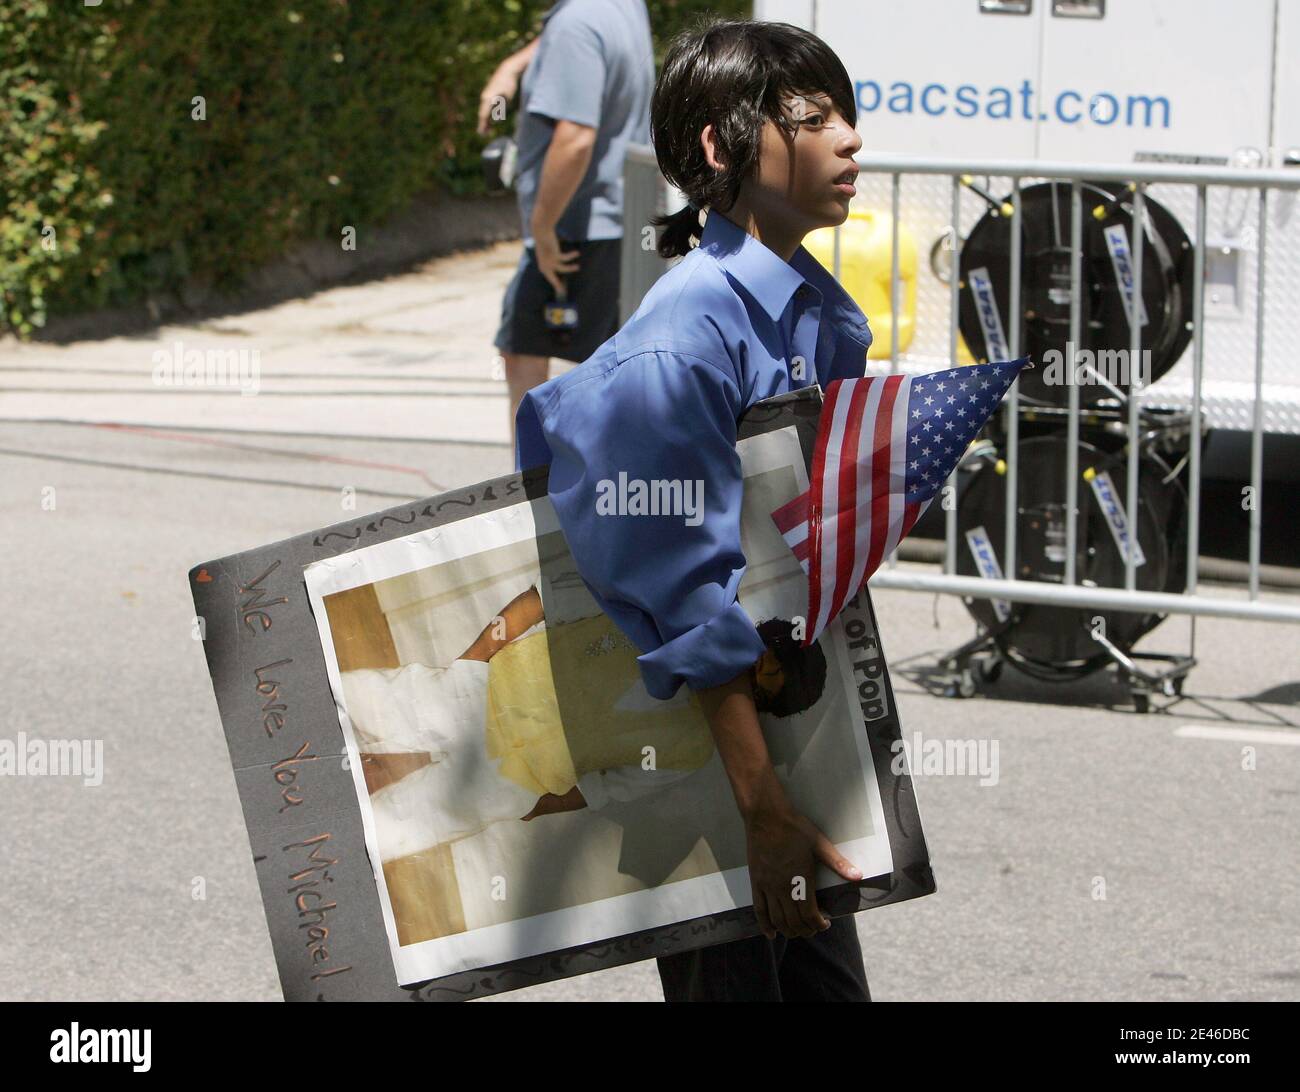 A handful of Michael Jackson fans show up outside the star's hotel. London,  England - 04.03.09 Stock Photo - Alamy